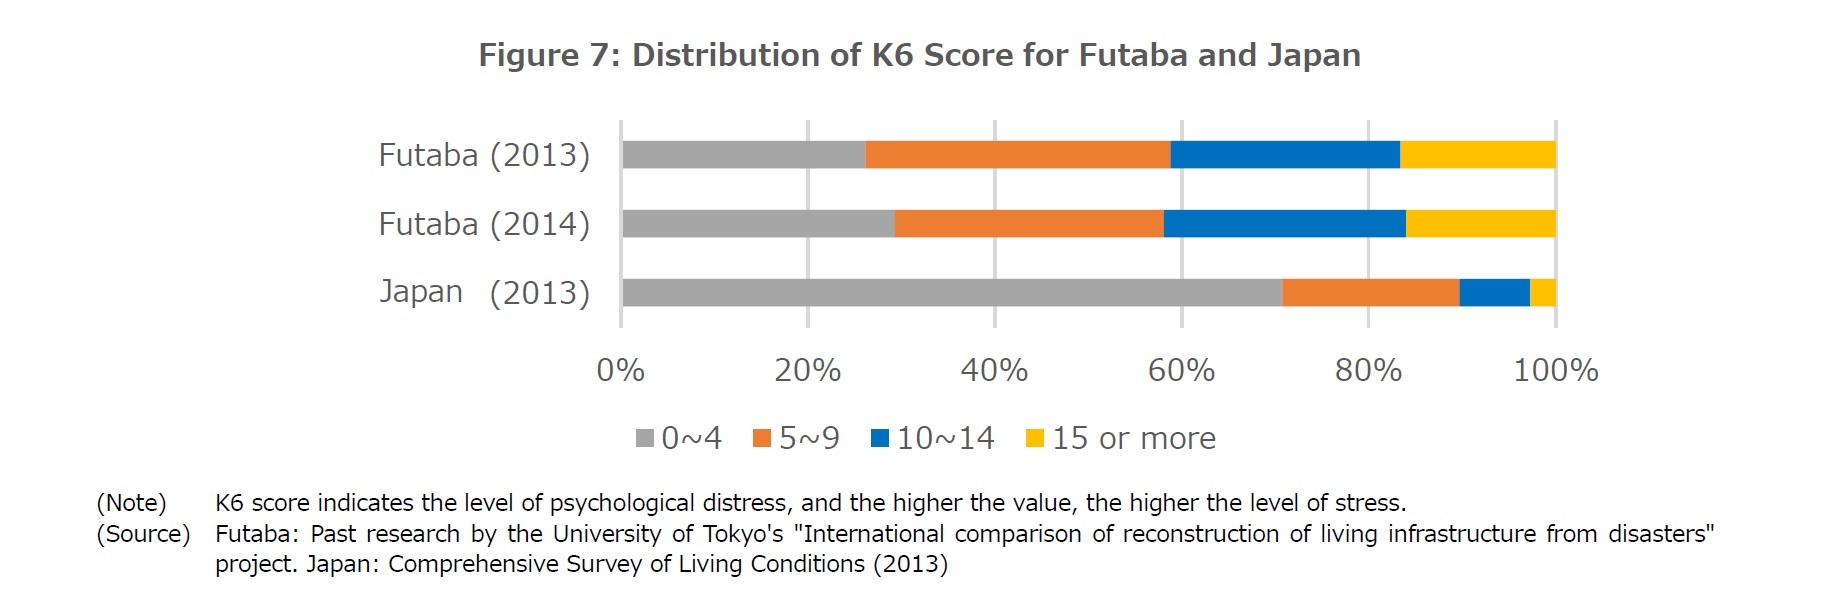 Figure 7: Distribution of K6 Score for Futaba and Japan